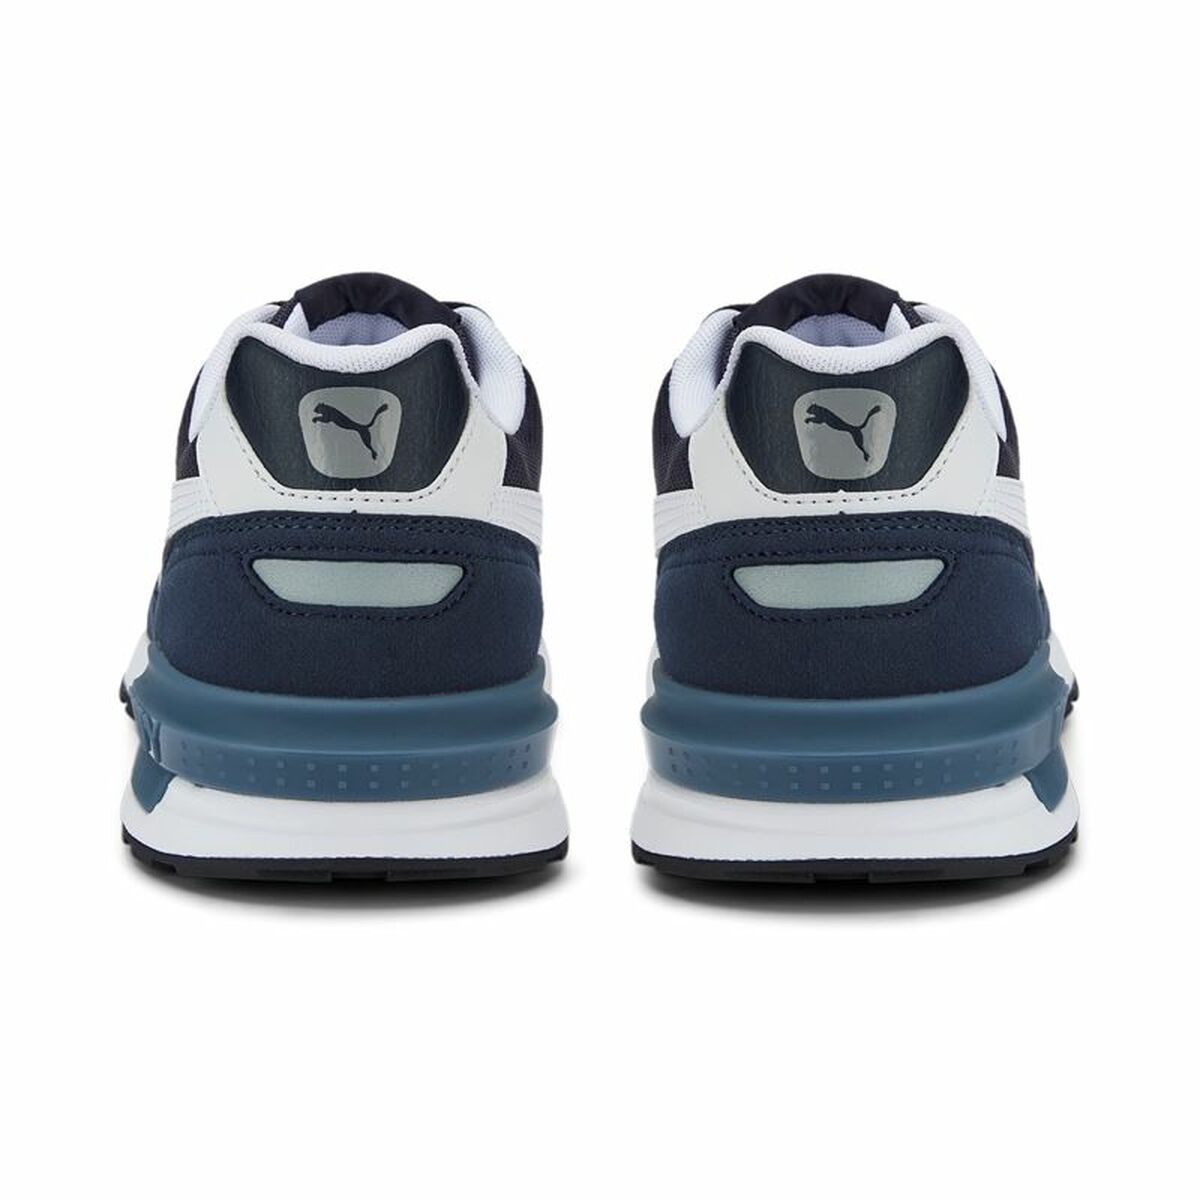 Sports Trainers for Women Puma Graviton Navy Blue